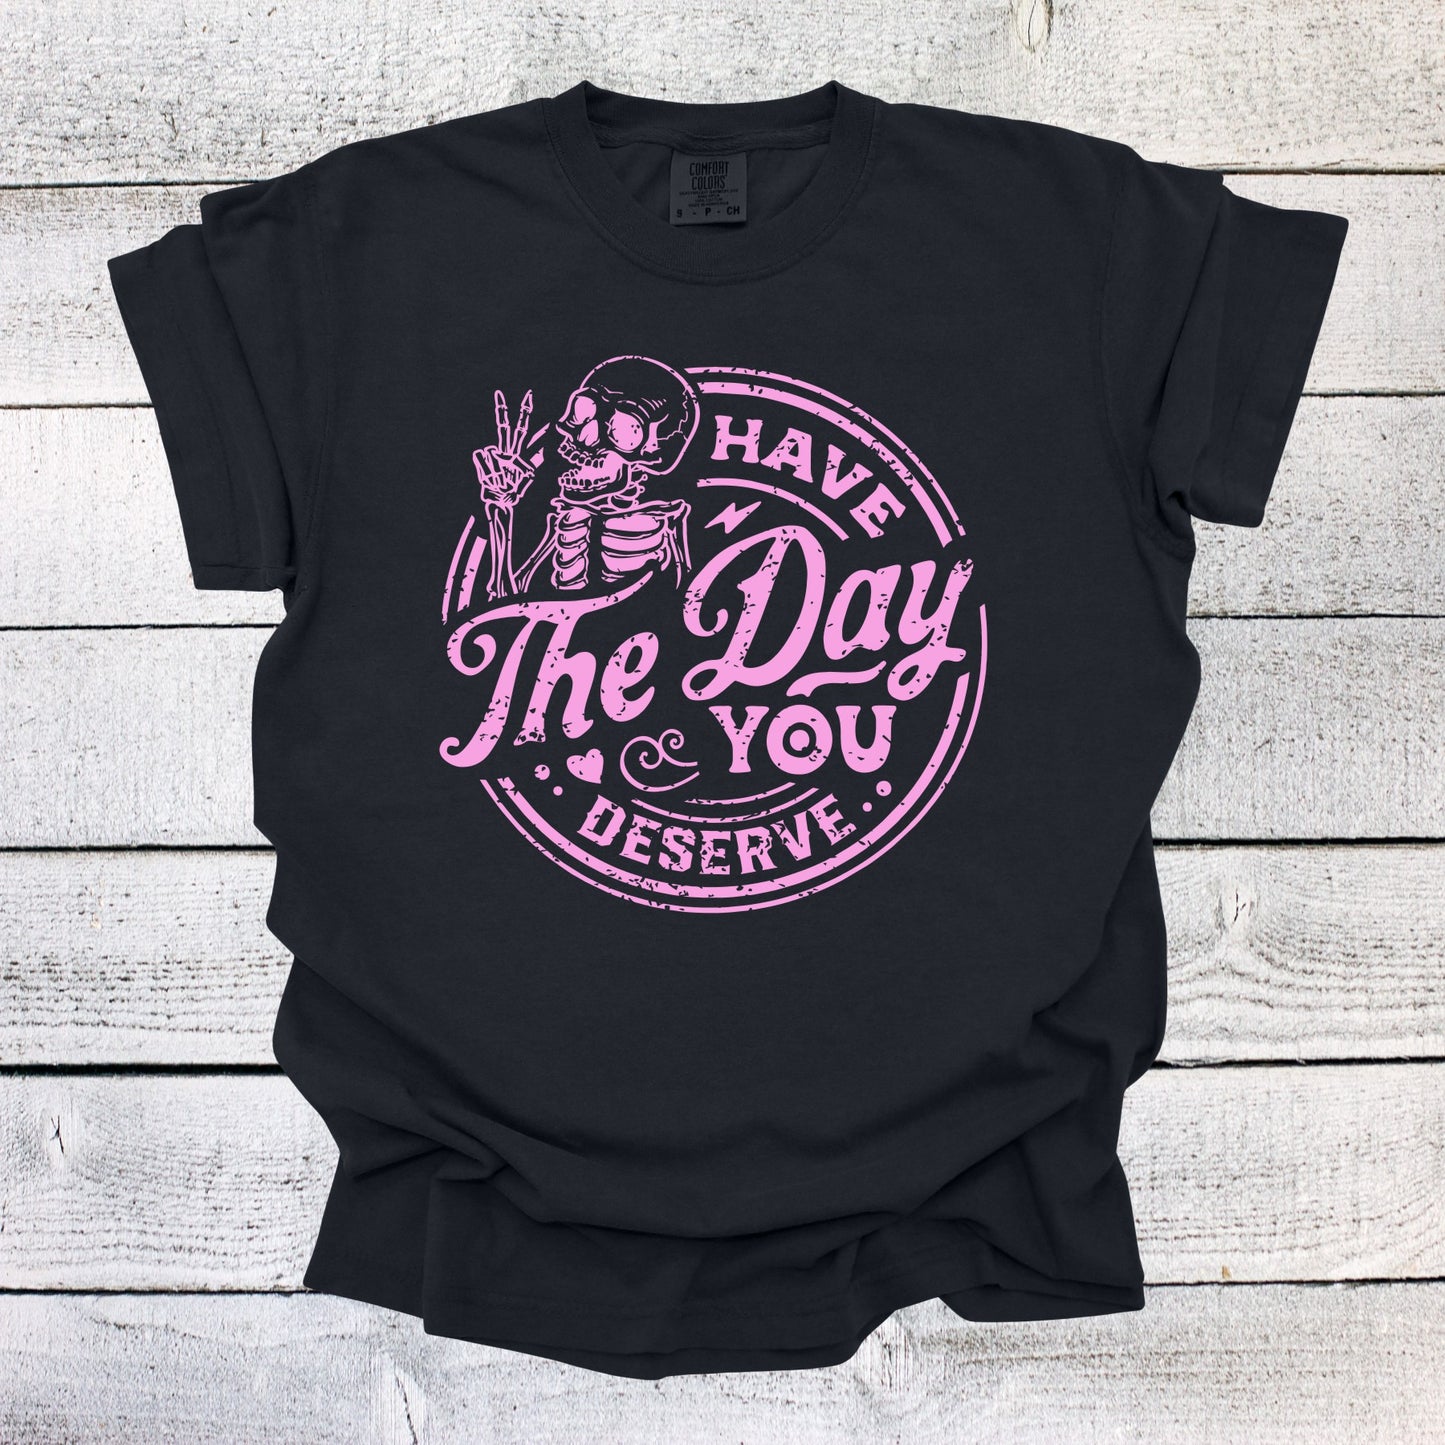 Have the Day You Deserve Shirt